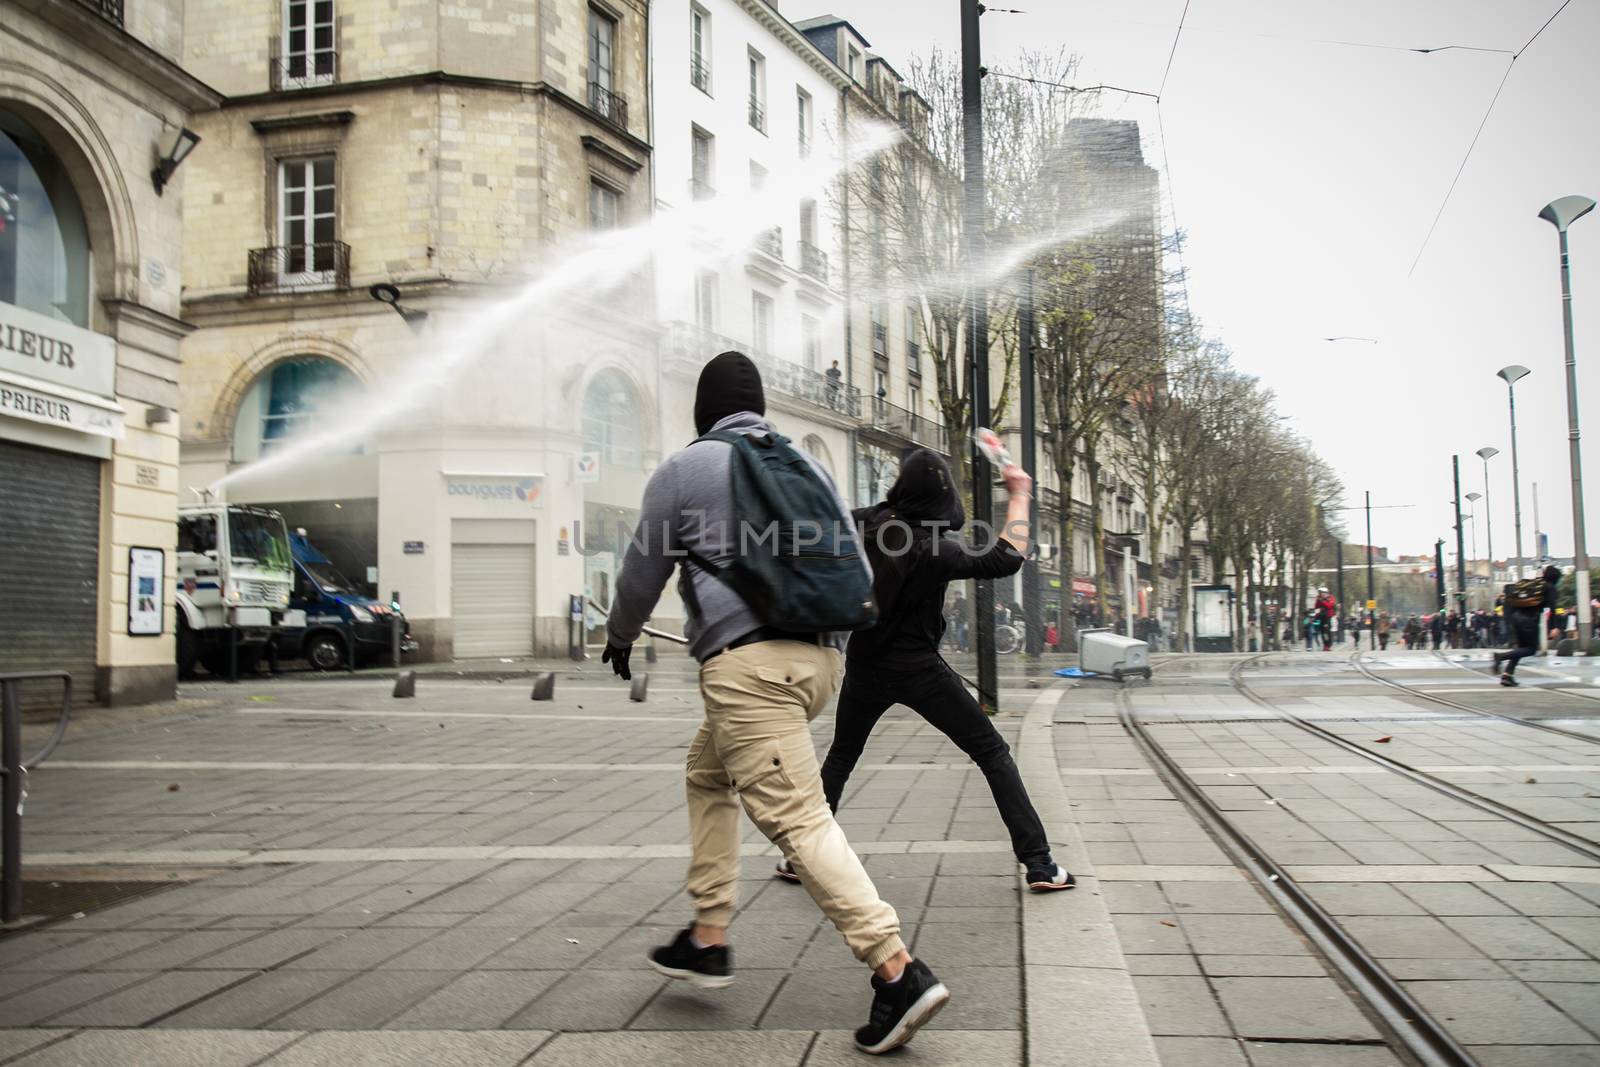 FRANCE, Nantes: Protesters are about to throw something to police forces during a demonstration on April 9, 2016 in Nantes, western France, against the French government's proposed labour law reforms. Fresh strikes by unions and students are being held across France against proposed reforms to France's labour laws, heaping pressure on President Francois Hollande who suffered a major defeat over constitutional reforms on March 30. 